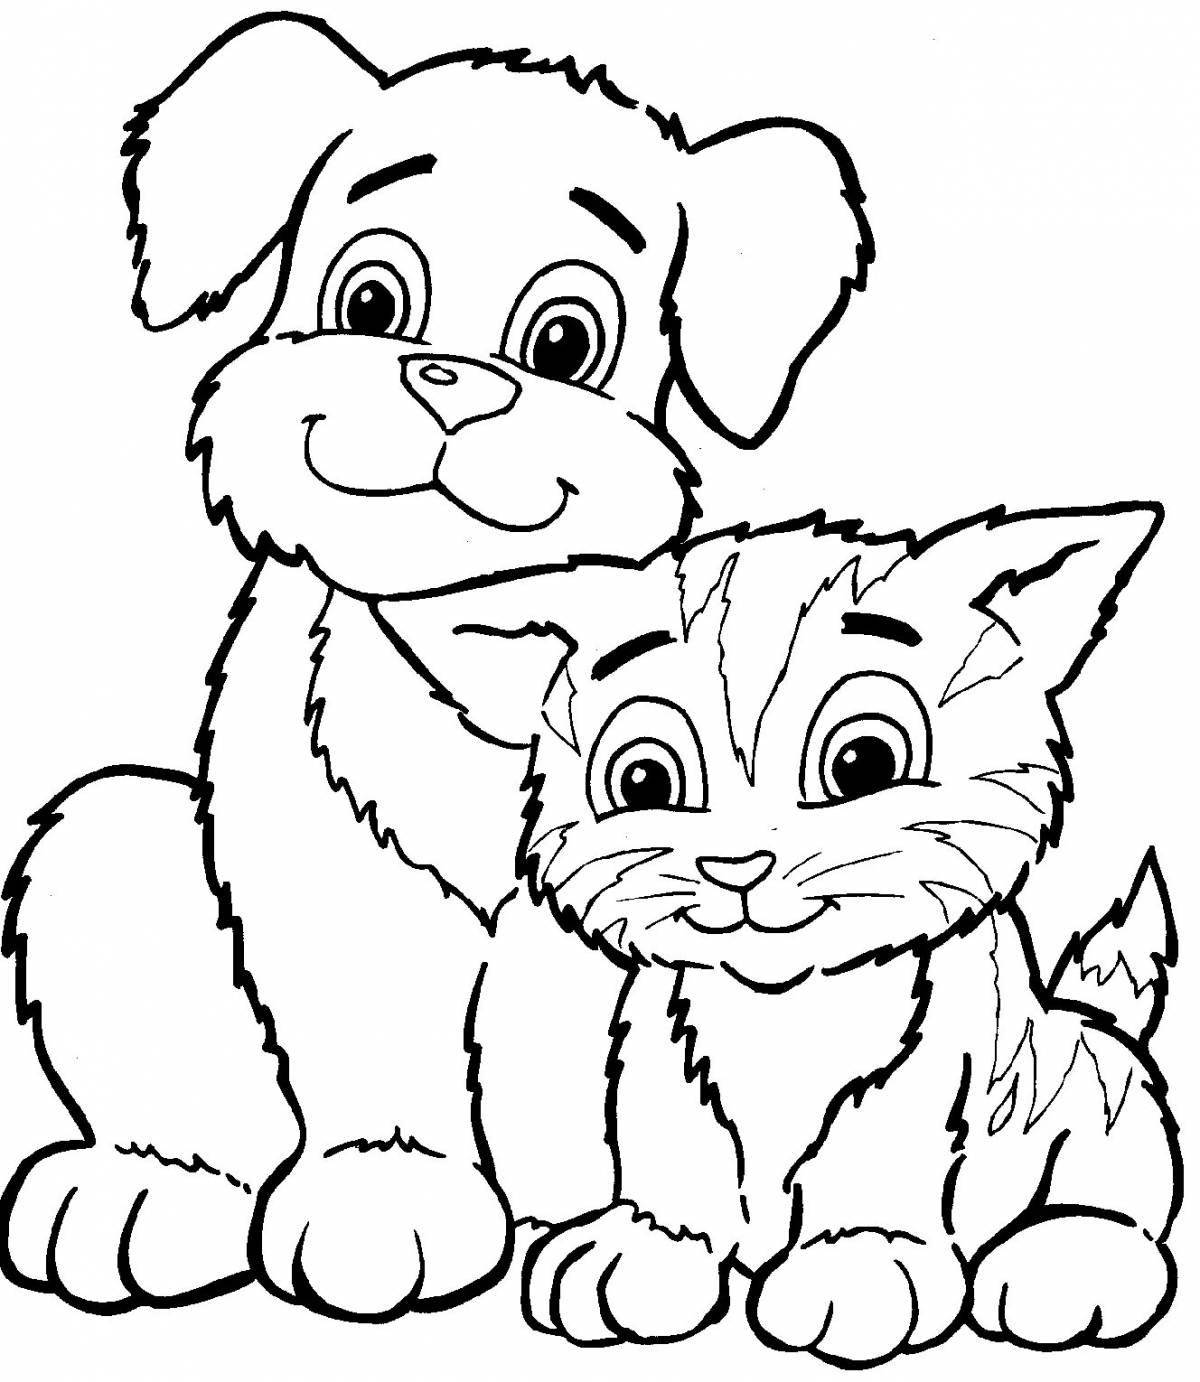 Imaginary coloring pages pets for kids 5-7 years old